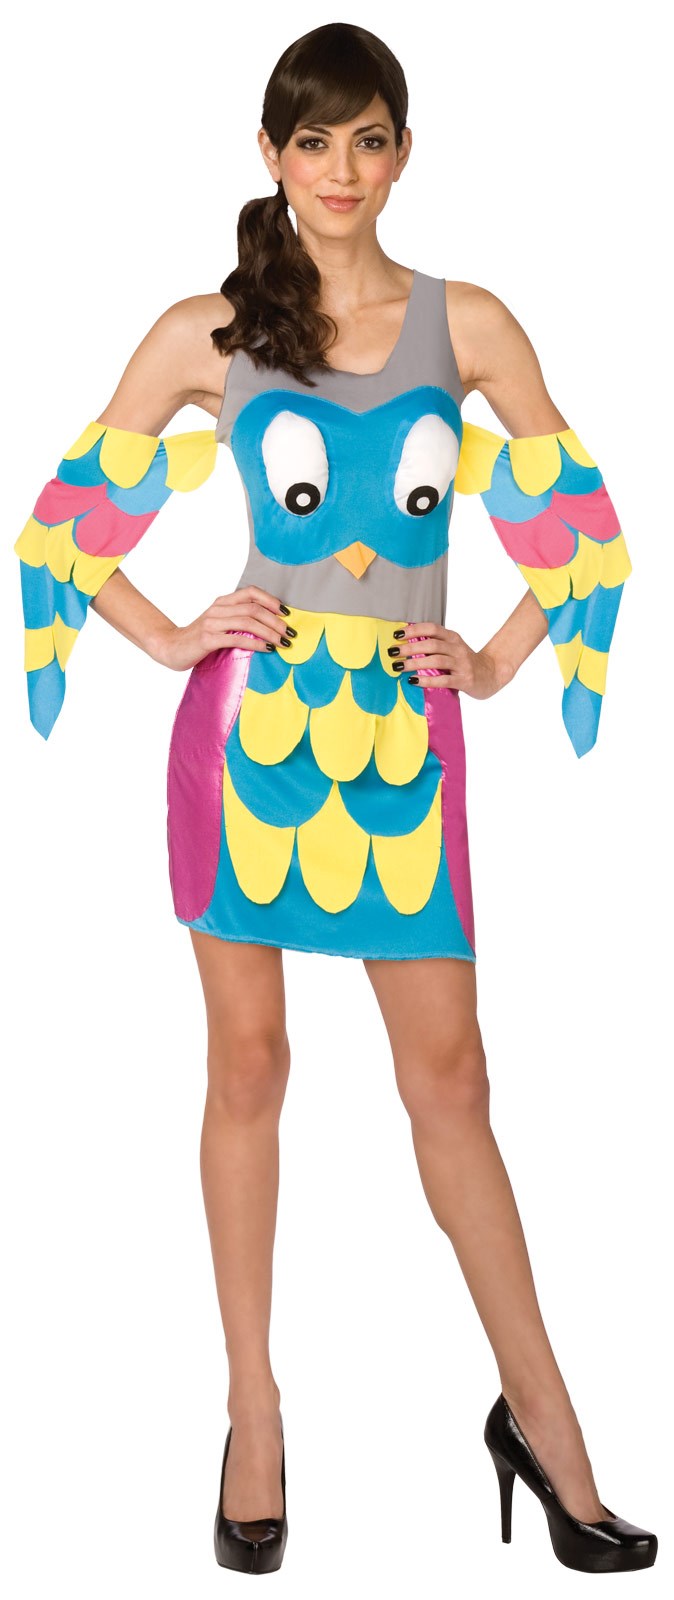 What a Hoot! Owl Adult Costume